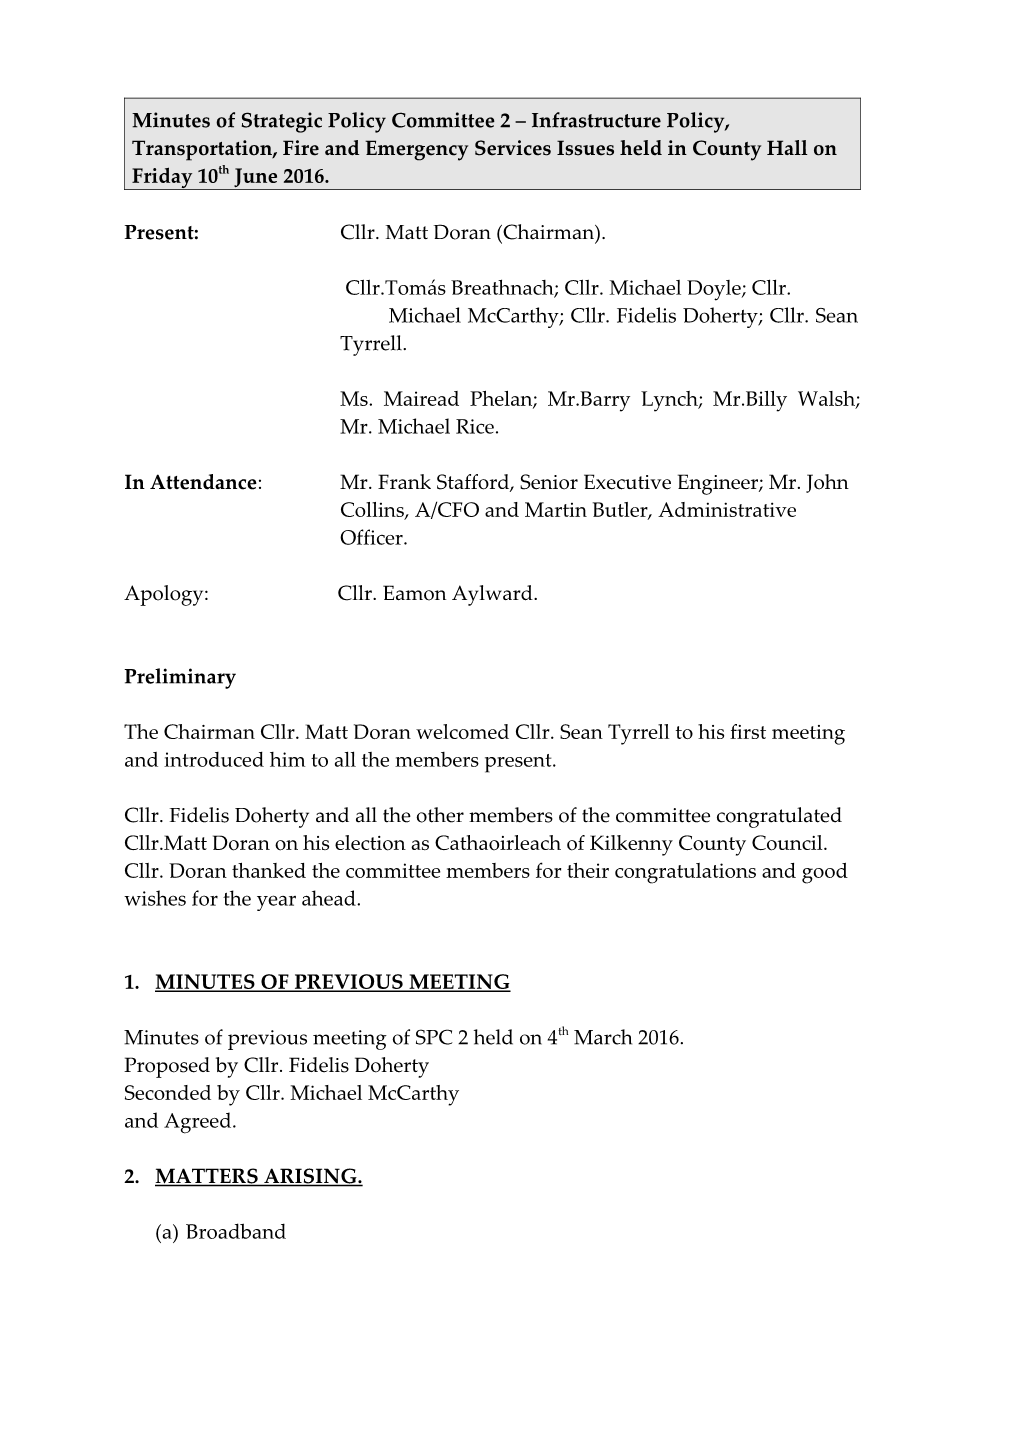 Minutes of Strategic Policy Committee 2 Infrastructure, Transportation, Water Services